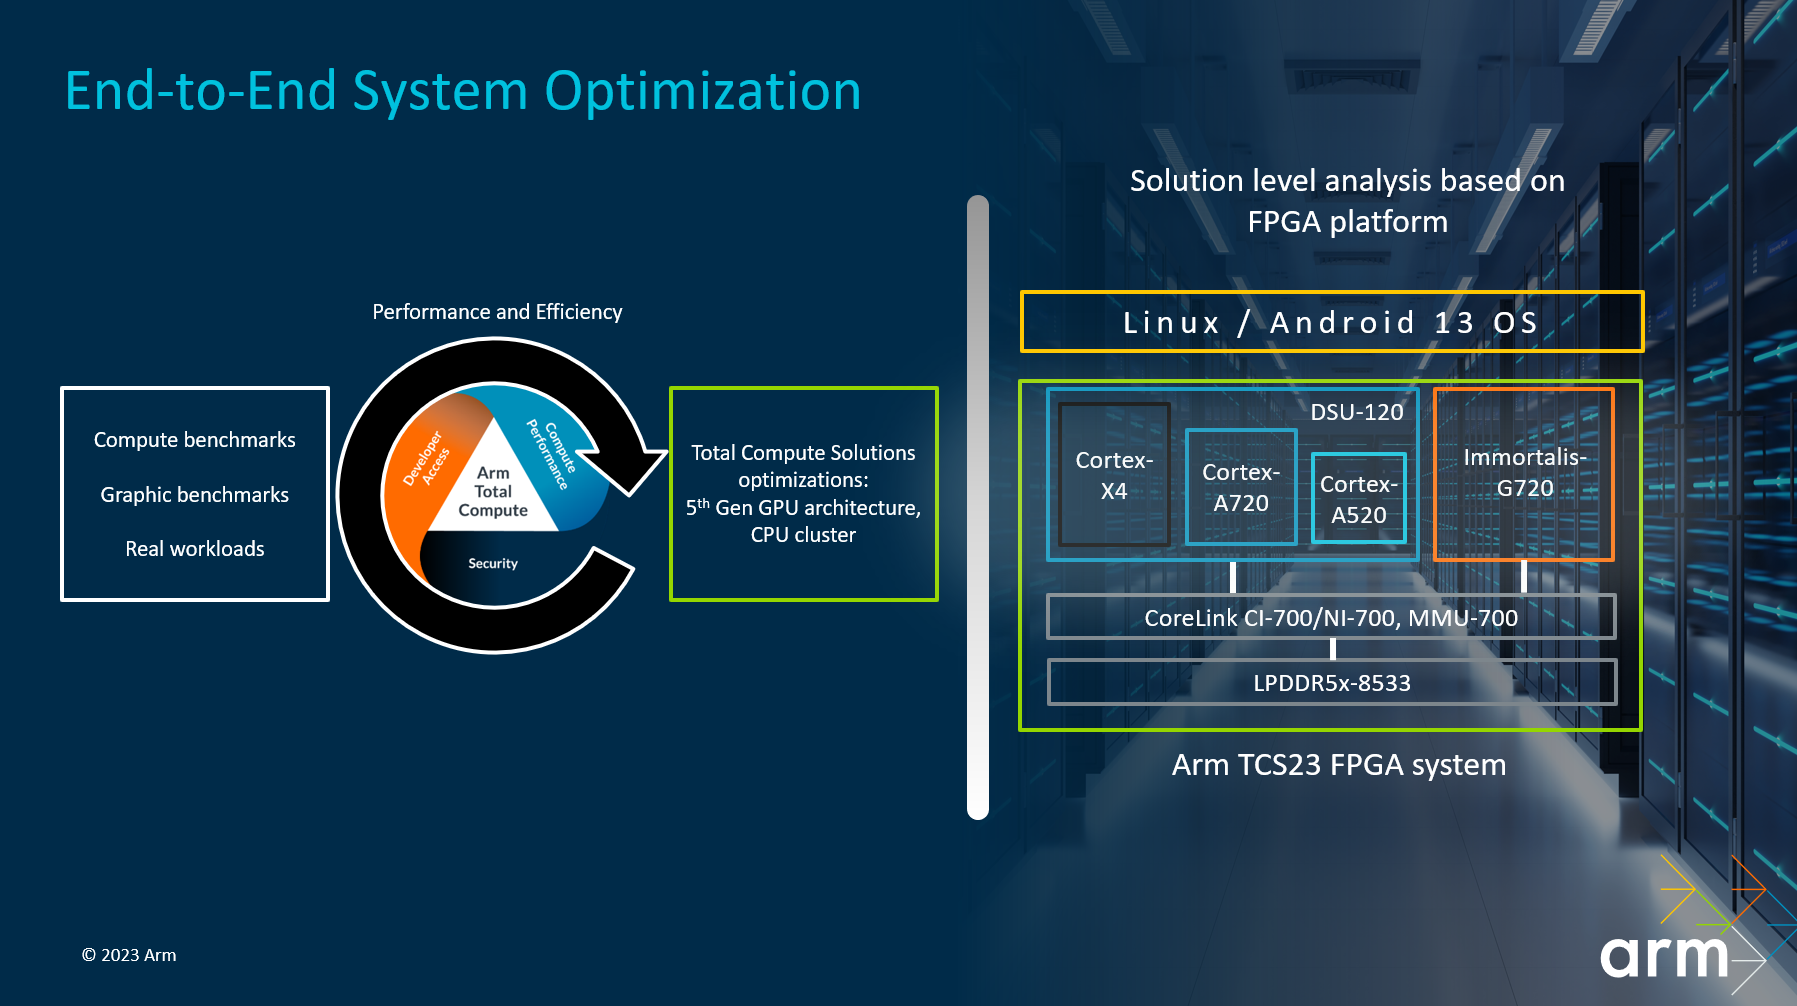 End-to-end system optimizations with TCS23